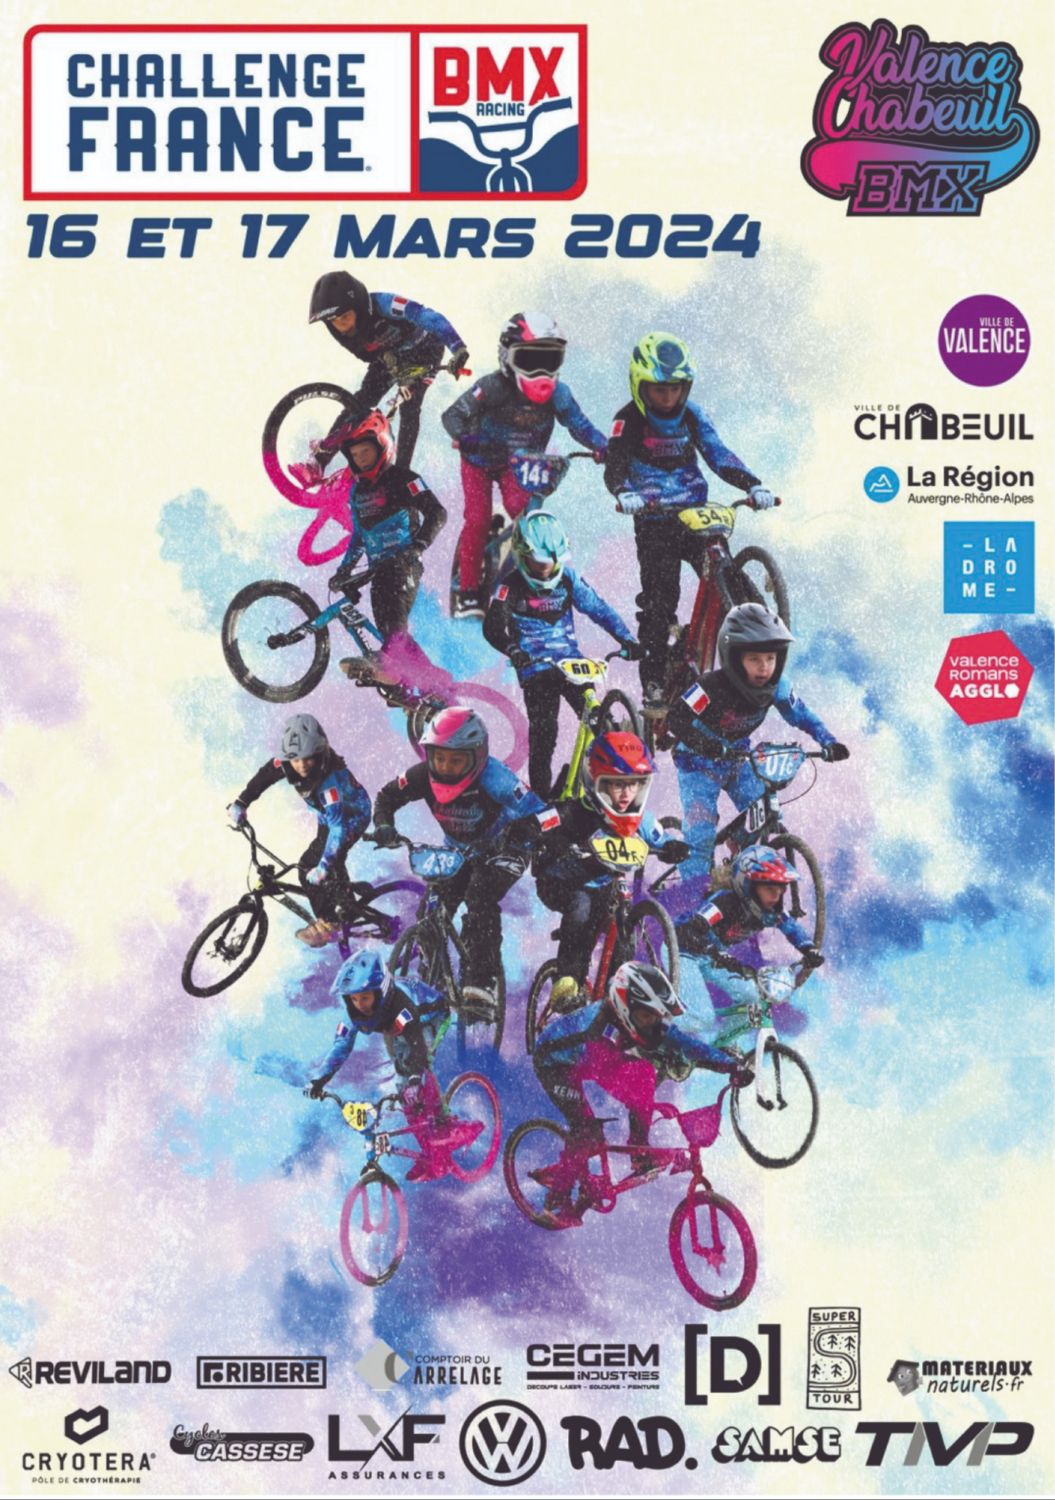 Challenge France - 16 & 17 Mars 2024 - Chabeuil